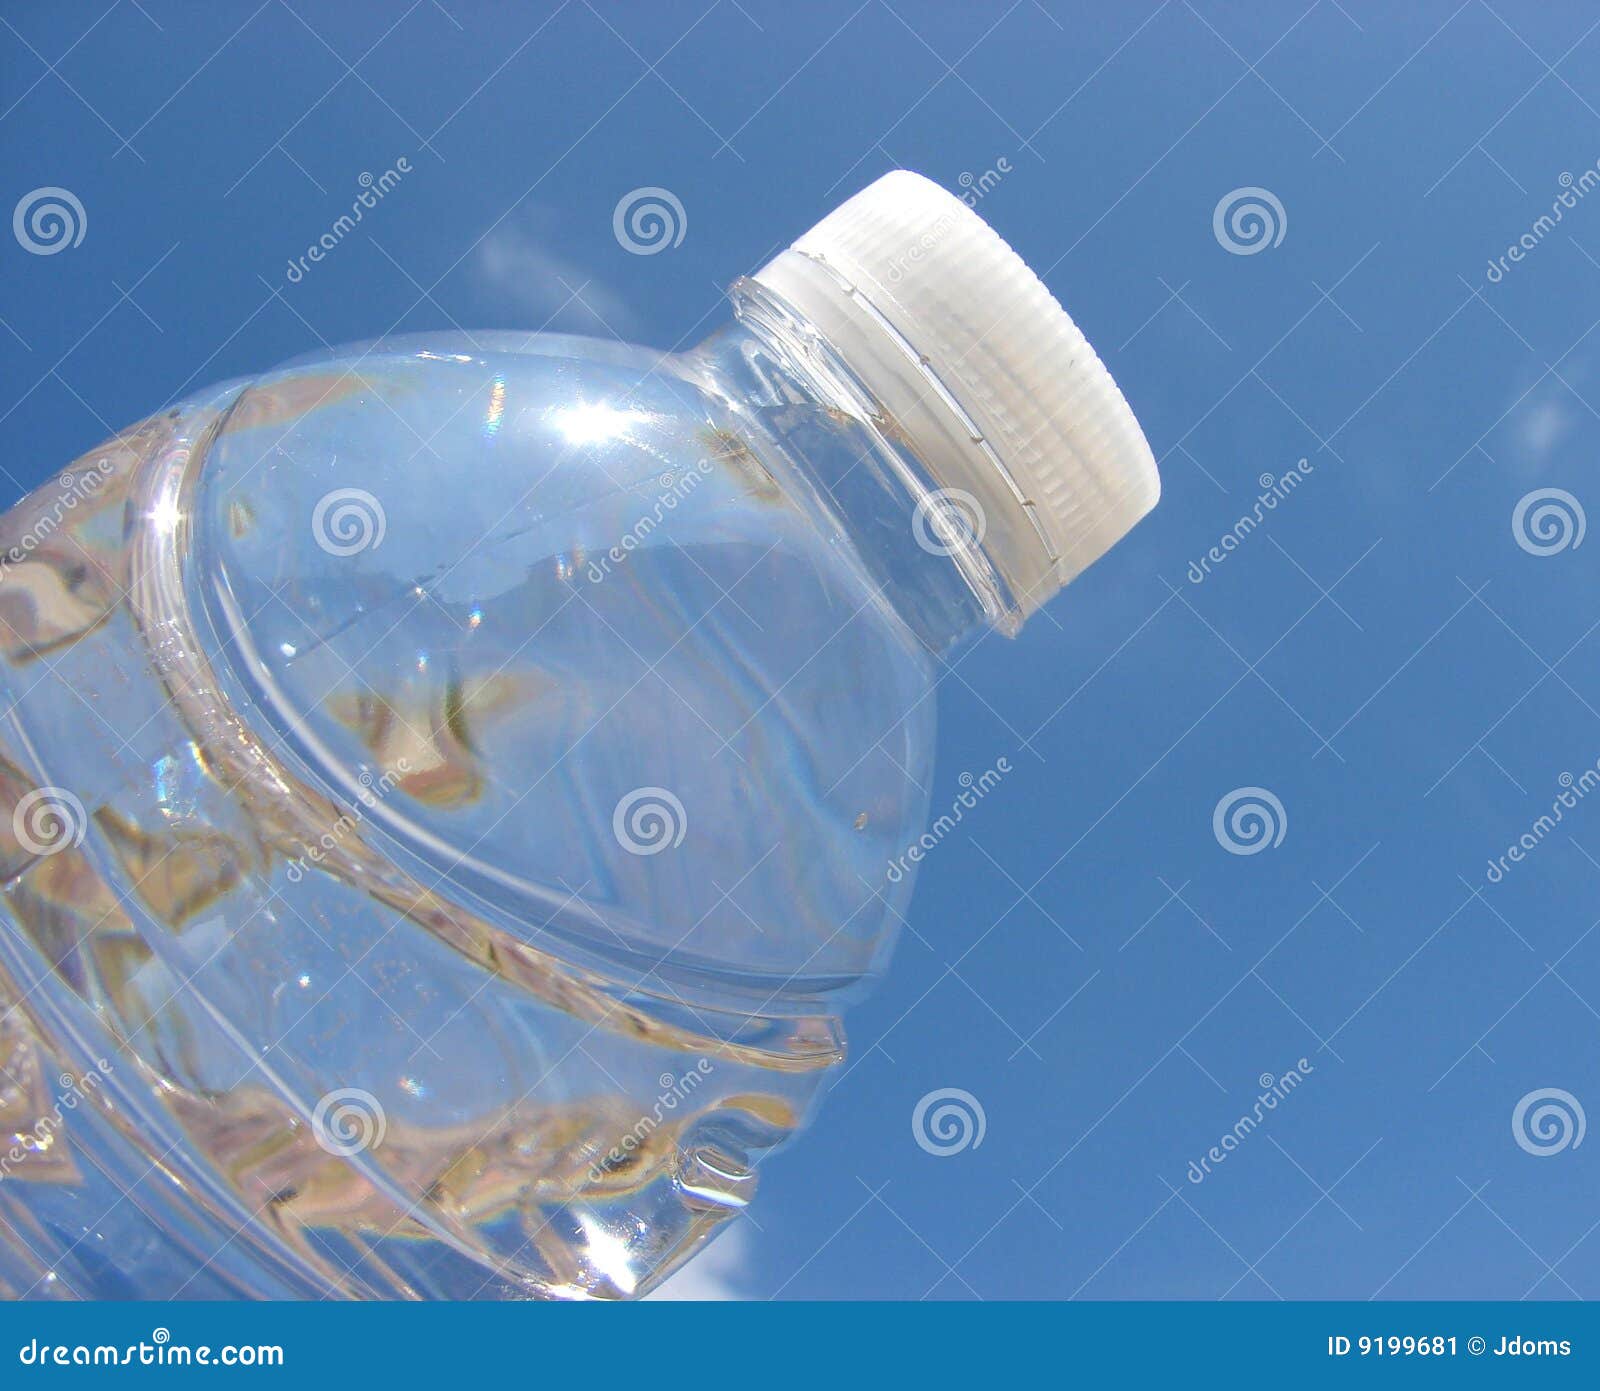 Bottle Of Water On Clear Sky From A Plane. Travel Concept. Stock Photo,  Picture and Royalty Free Image. Image 137561738.